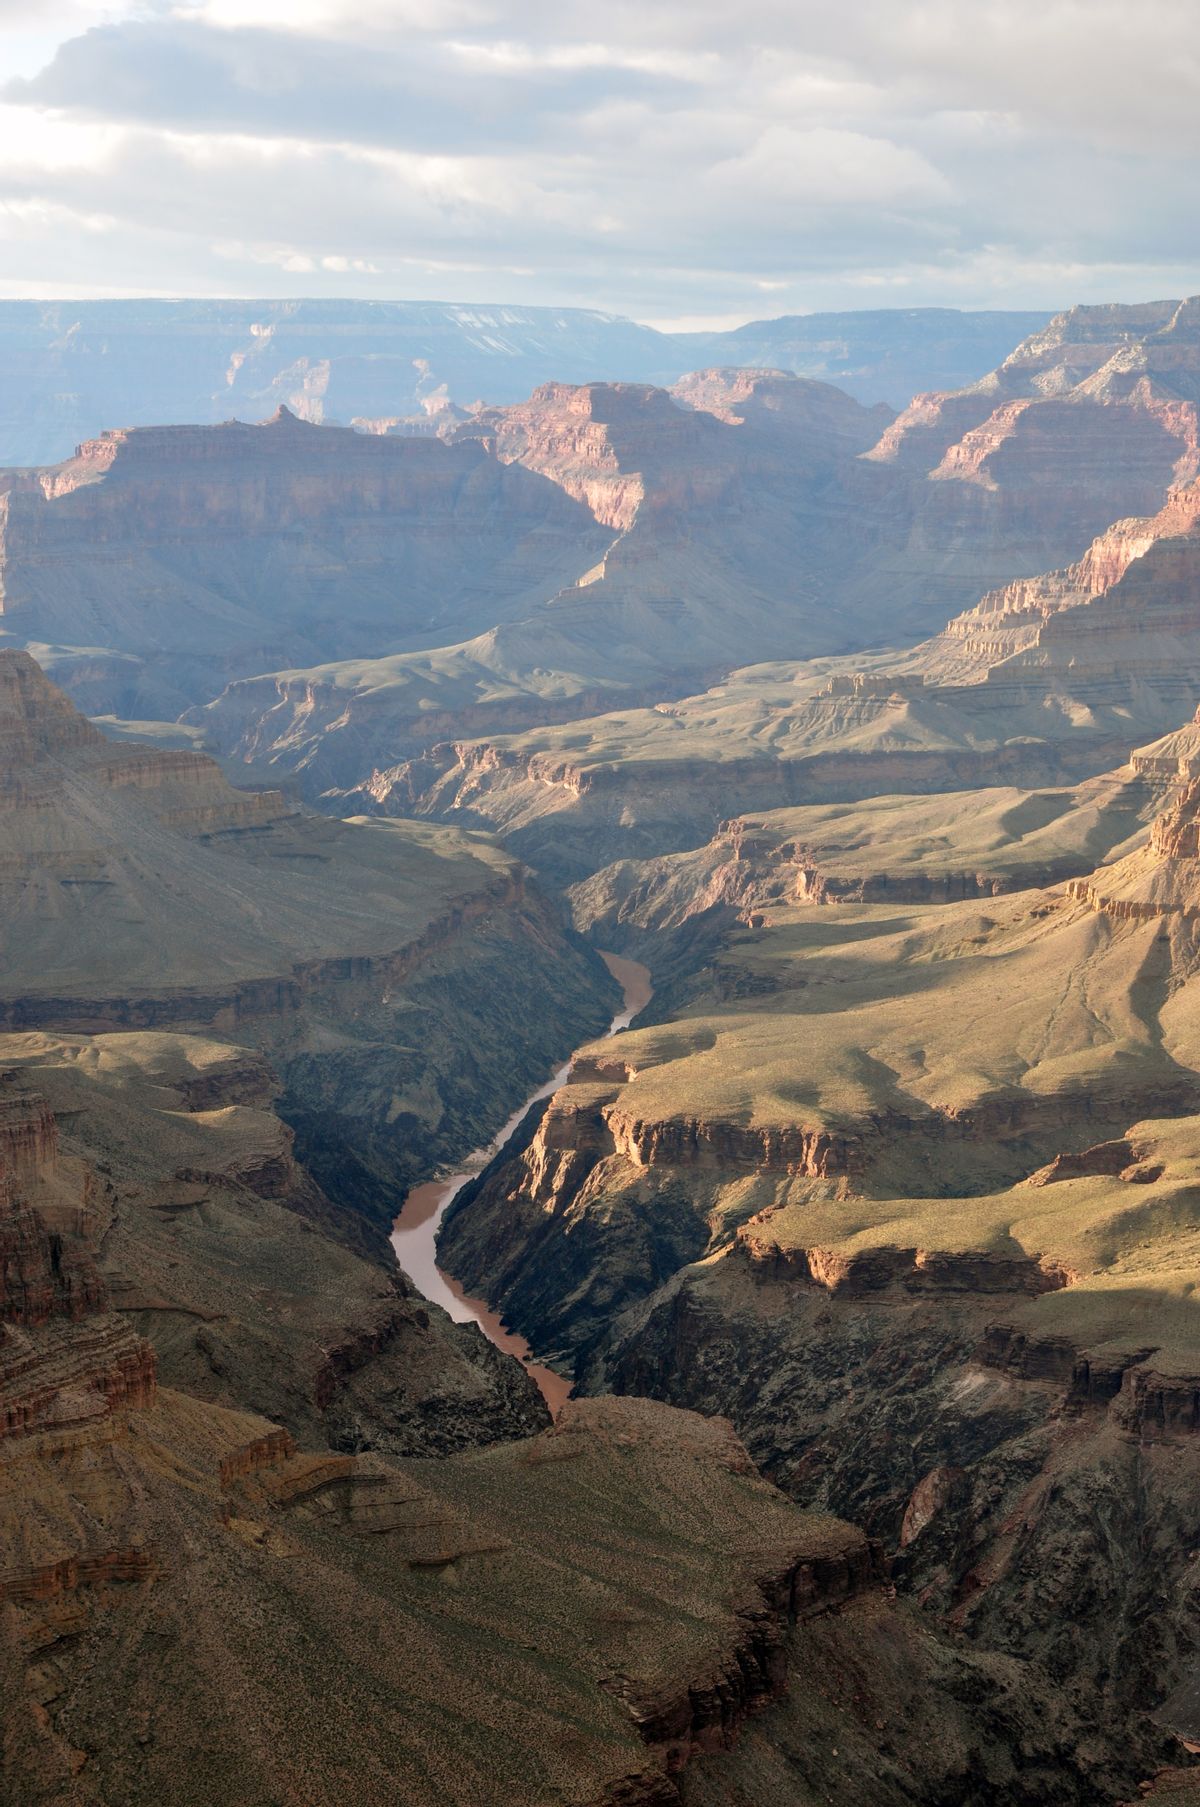 A rider attached to the appropriation bill that funds the EPA would end the moratorium on uranium mining near the Grand Canyon which could contaminate the Colorado River     